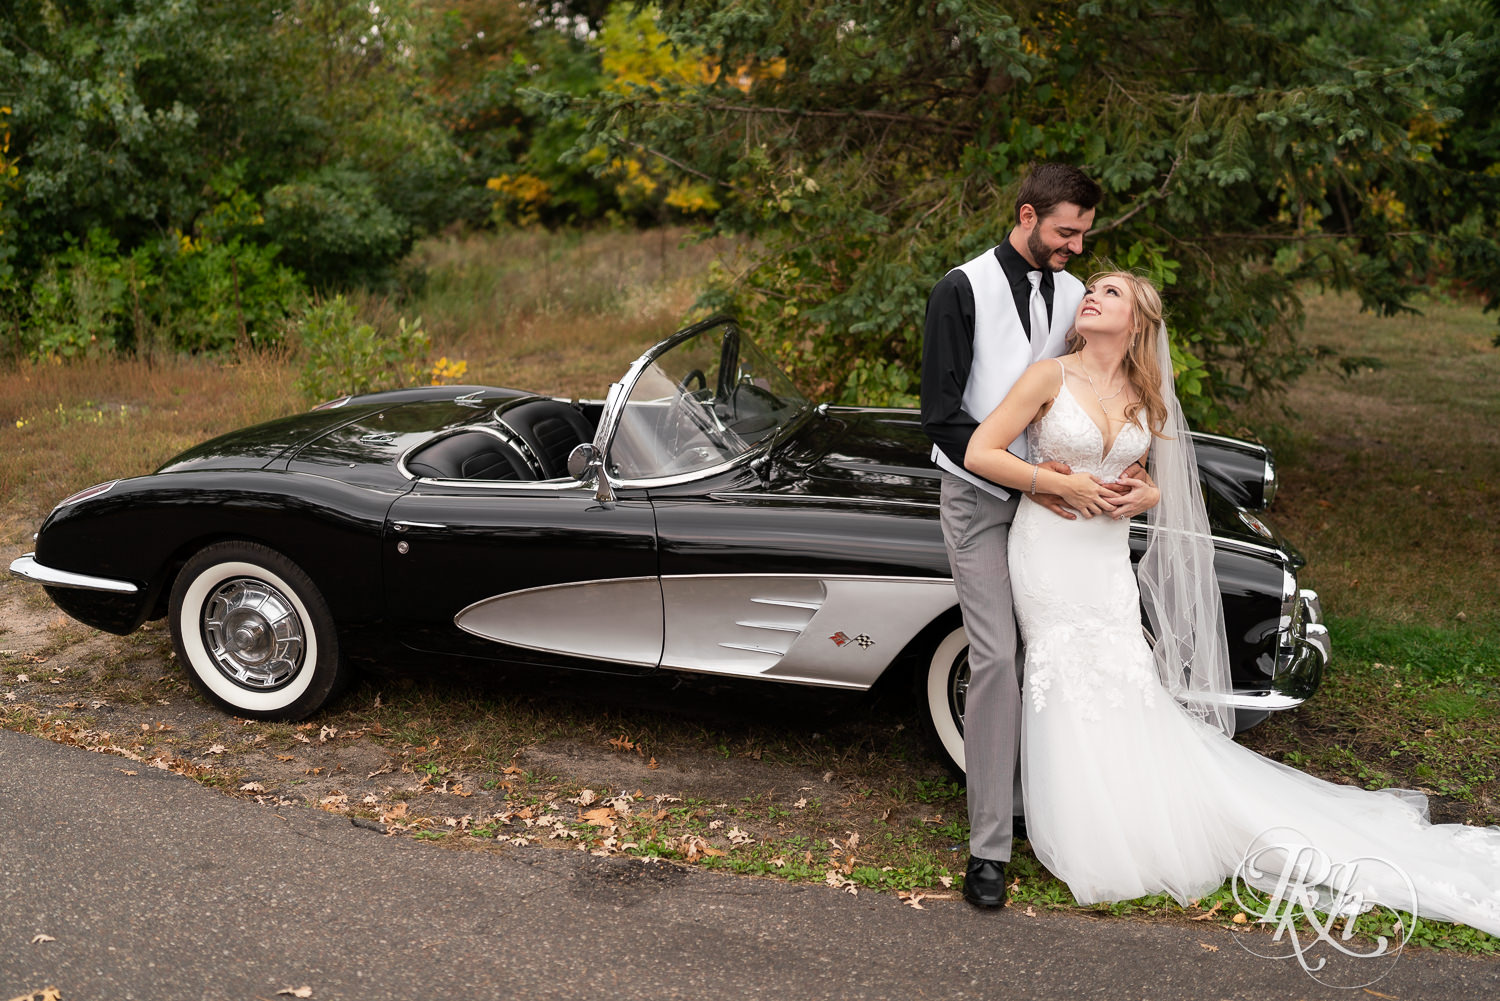 Bride and groom kiss in front of a vintage Corvette at Bunker Hills Event Center in Coon Rapids, Minnesota.